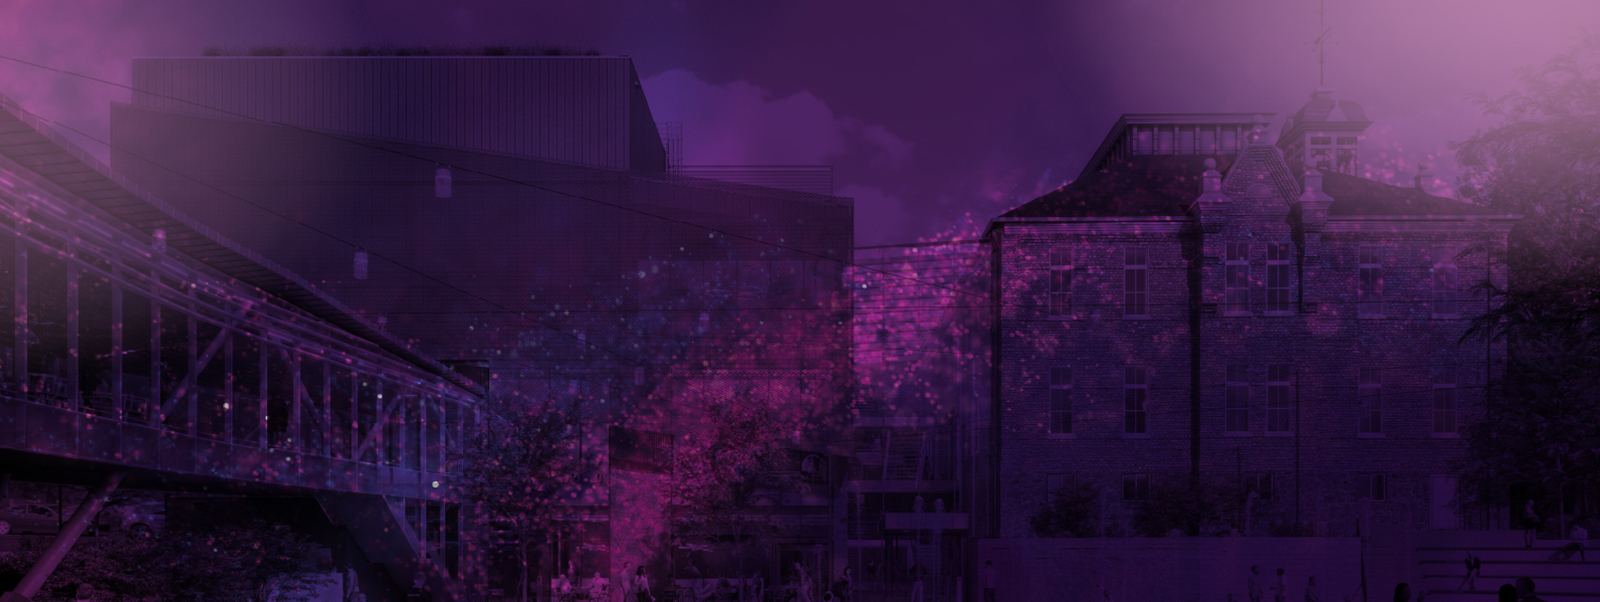 Dark purple moody visual of Town Square old school and performance centre